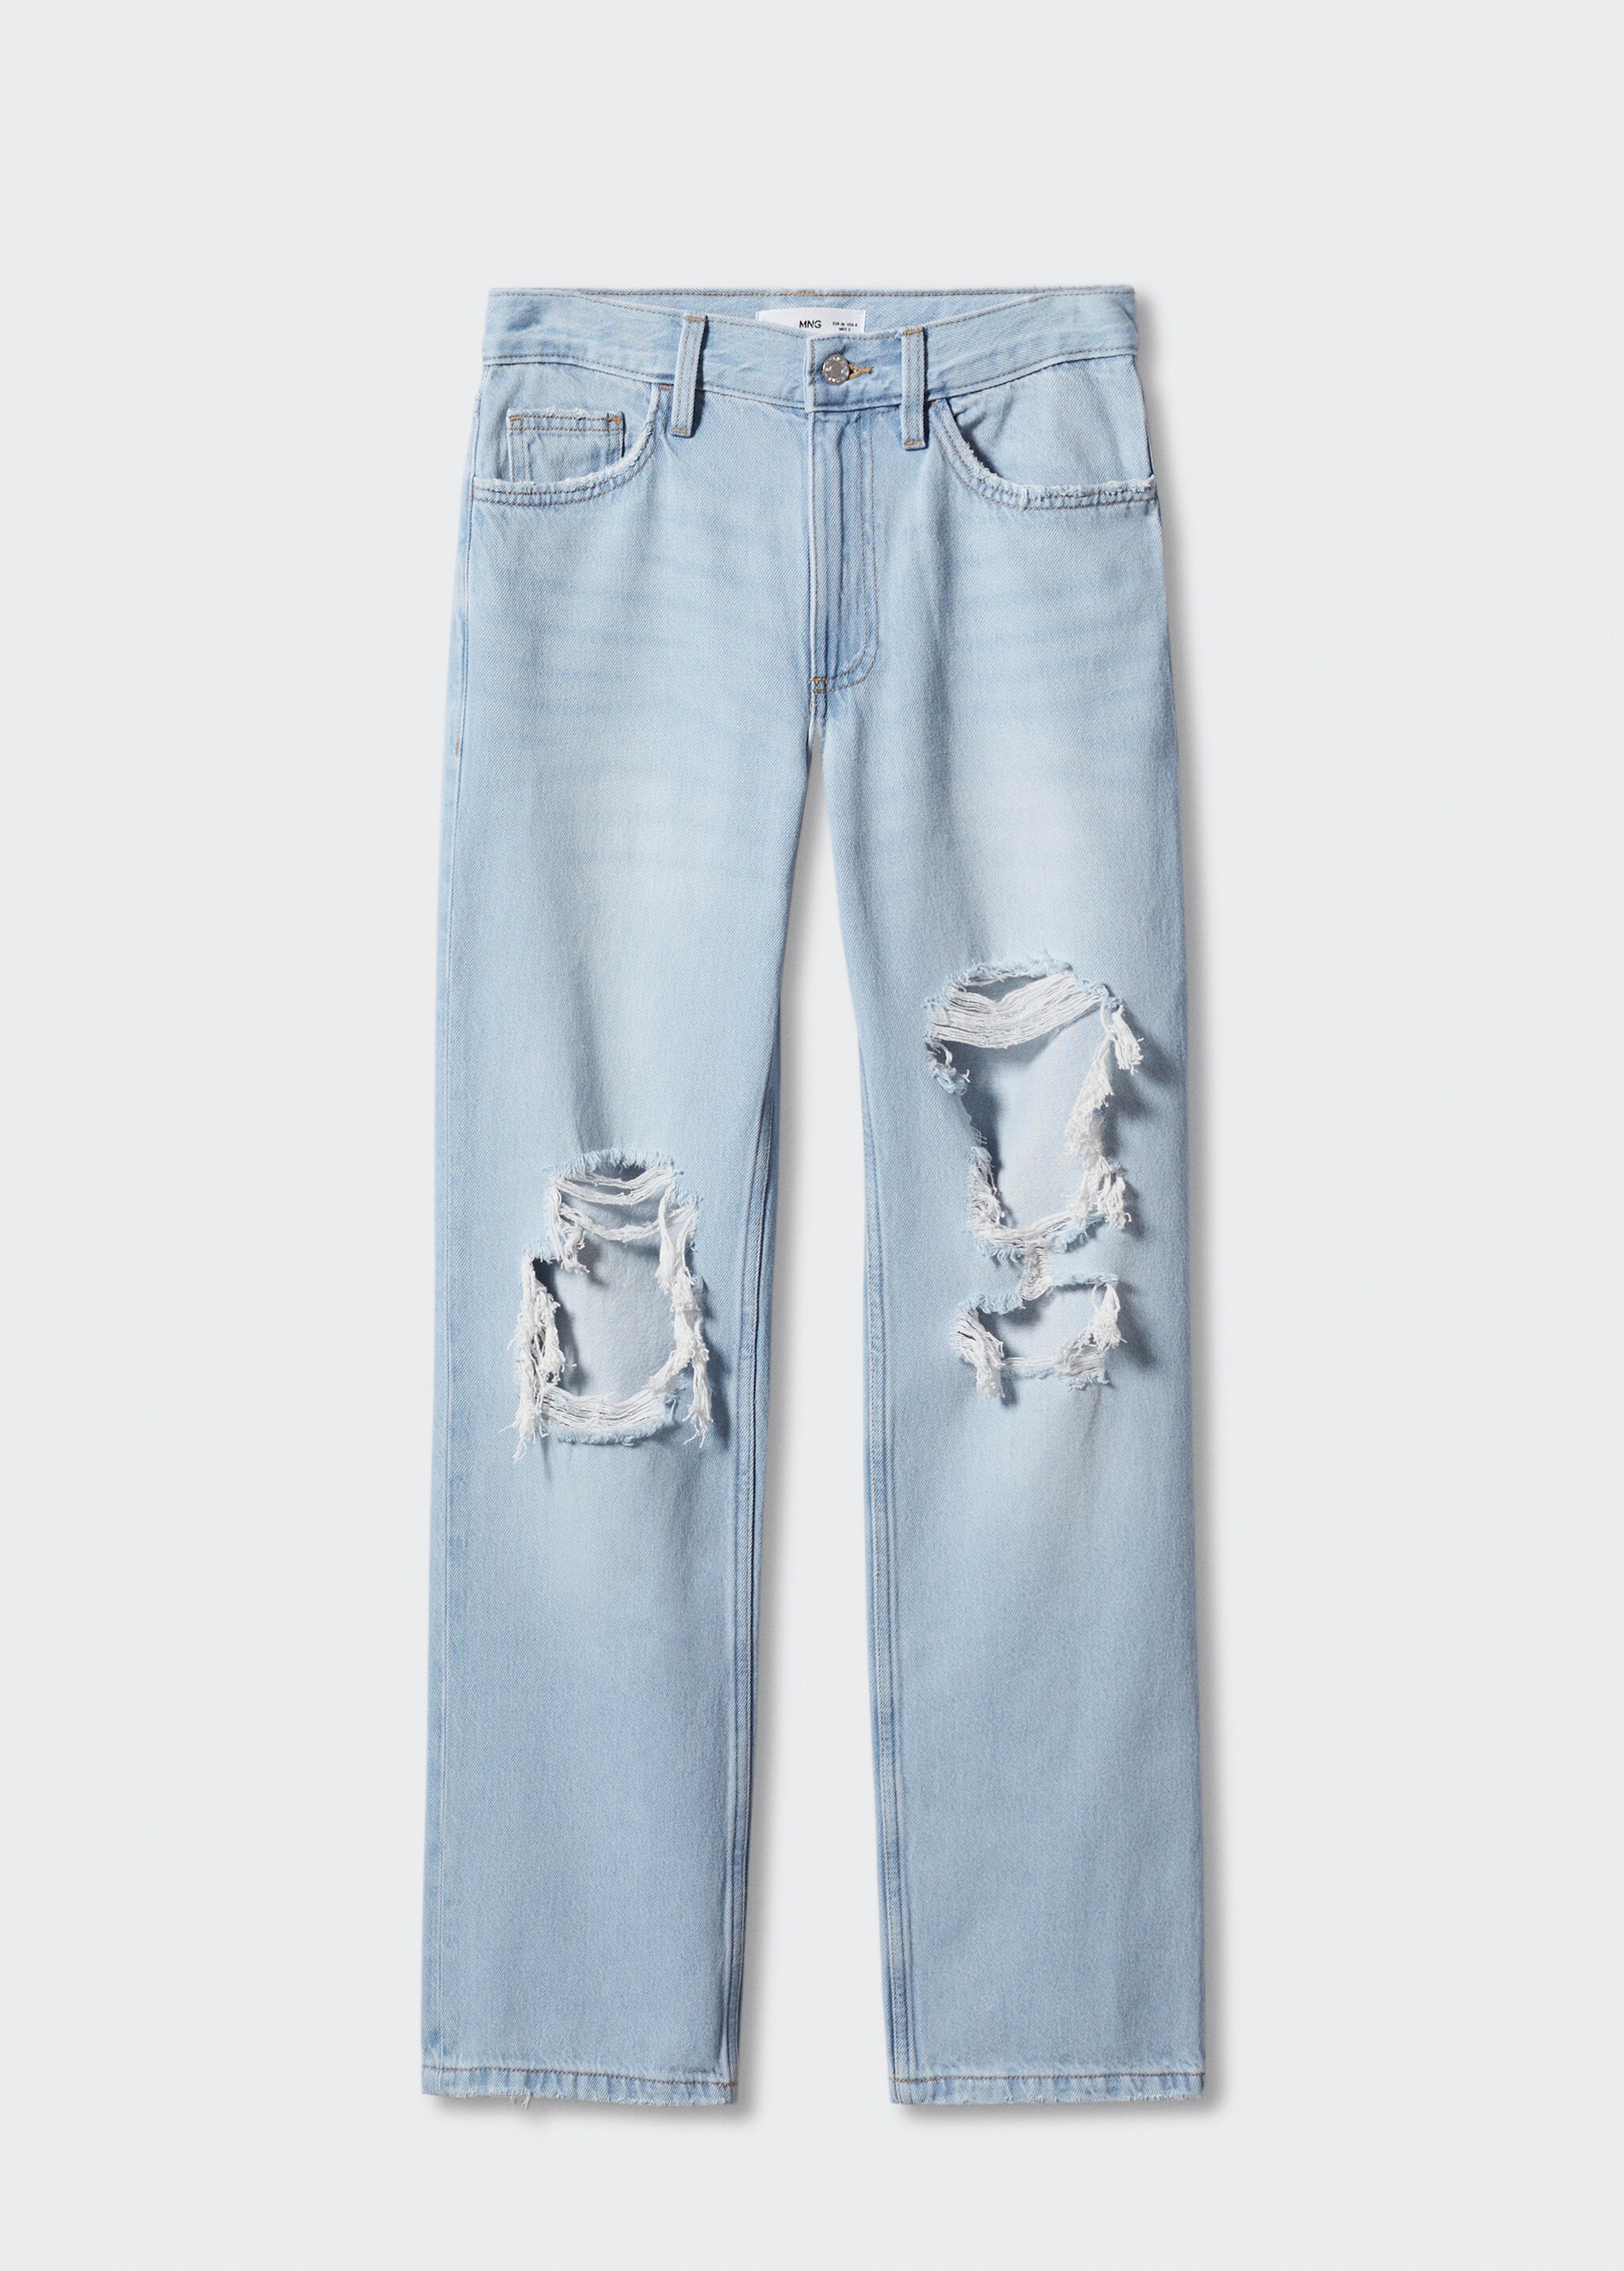 Ripped straight jeans - Article without model